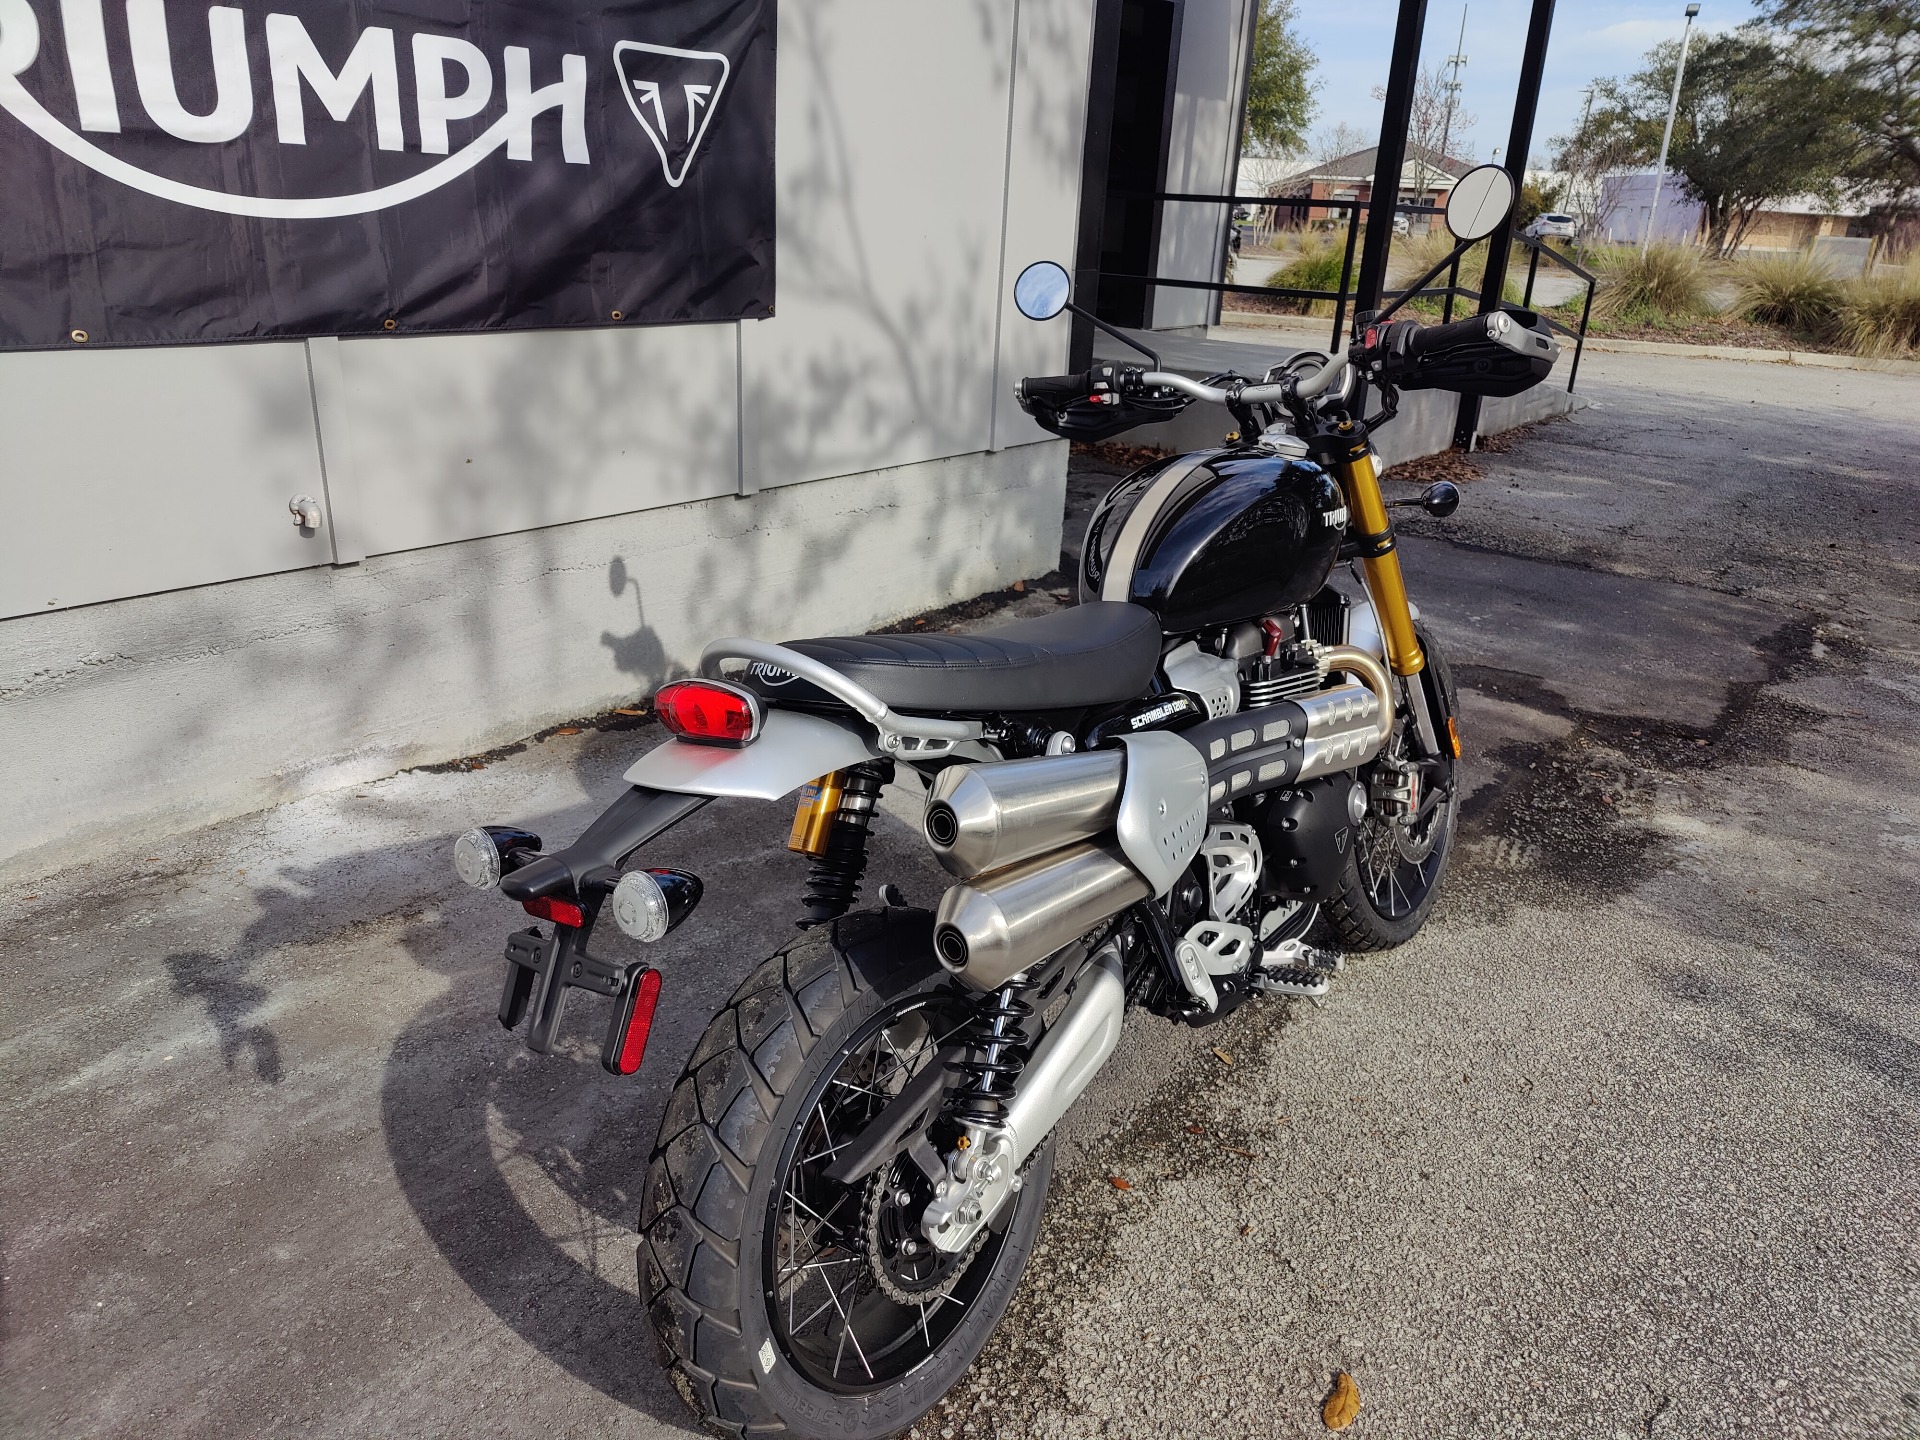 New 2023 Triumph Scrambler 1200 XE | Motorcycles in North